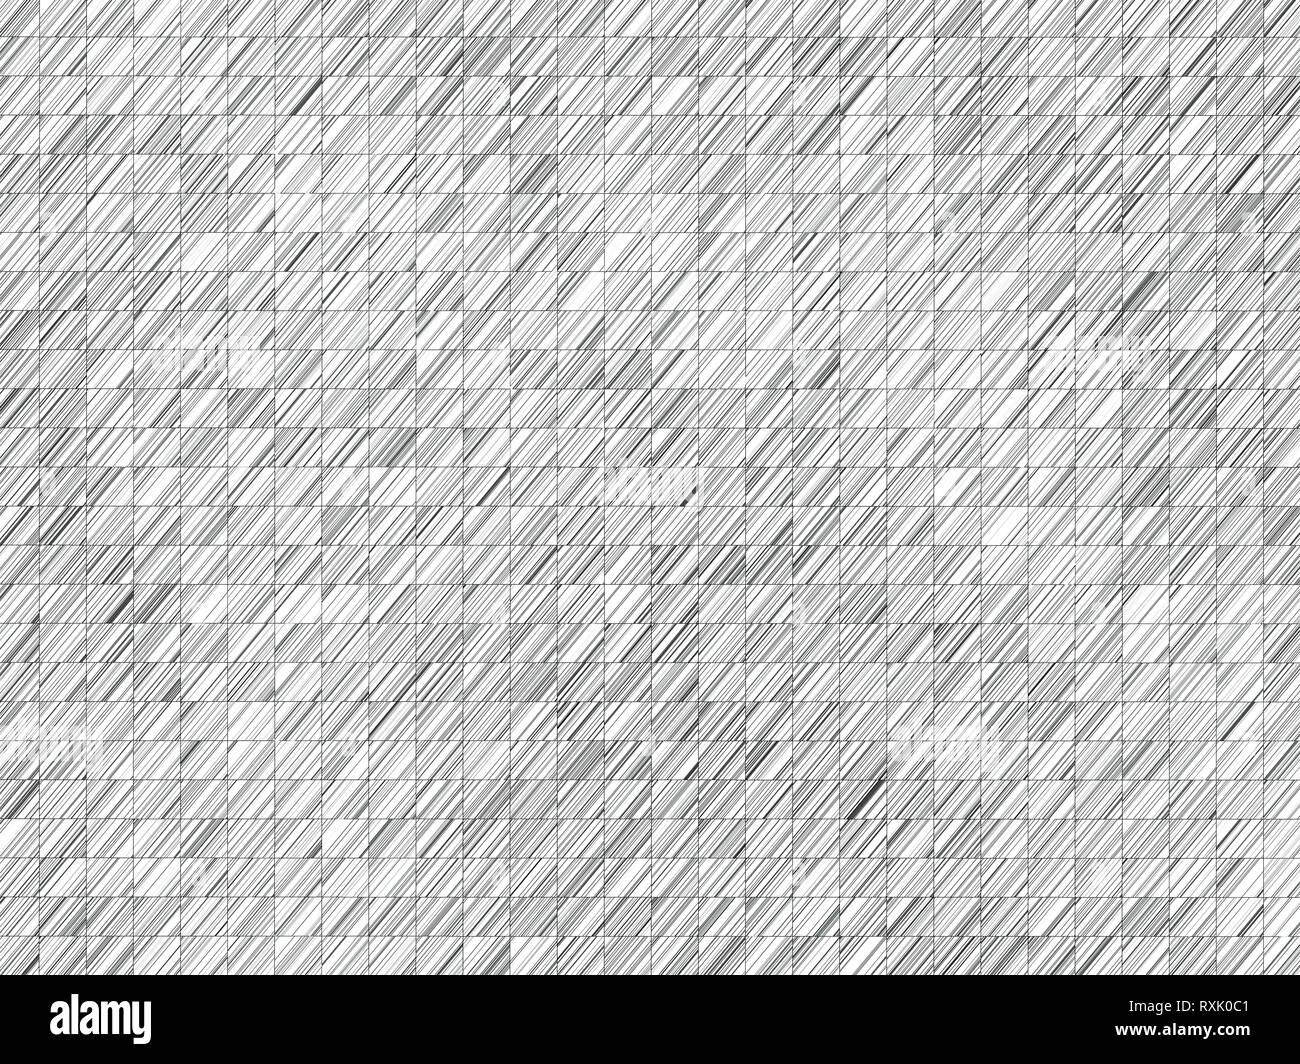 abstract fractal geometric black and white graphic background Stock Photo